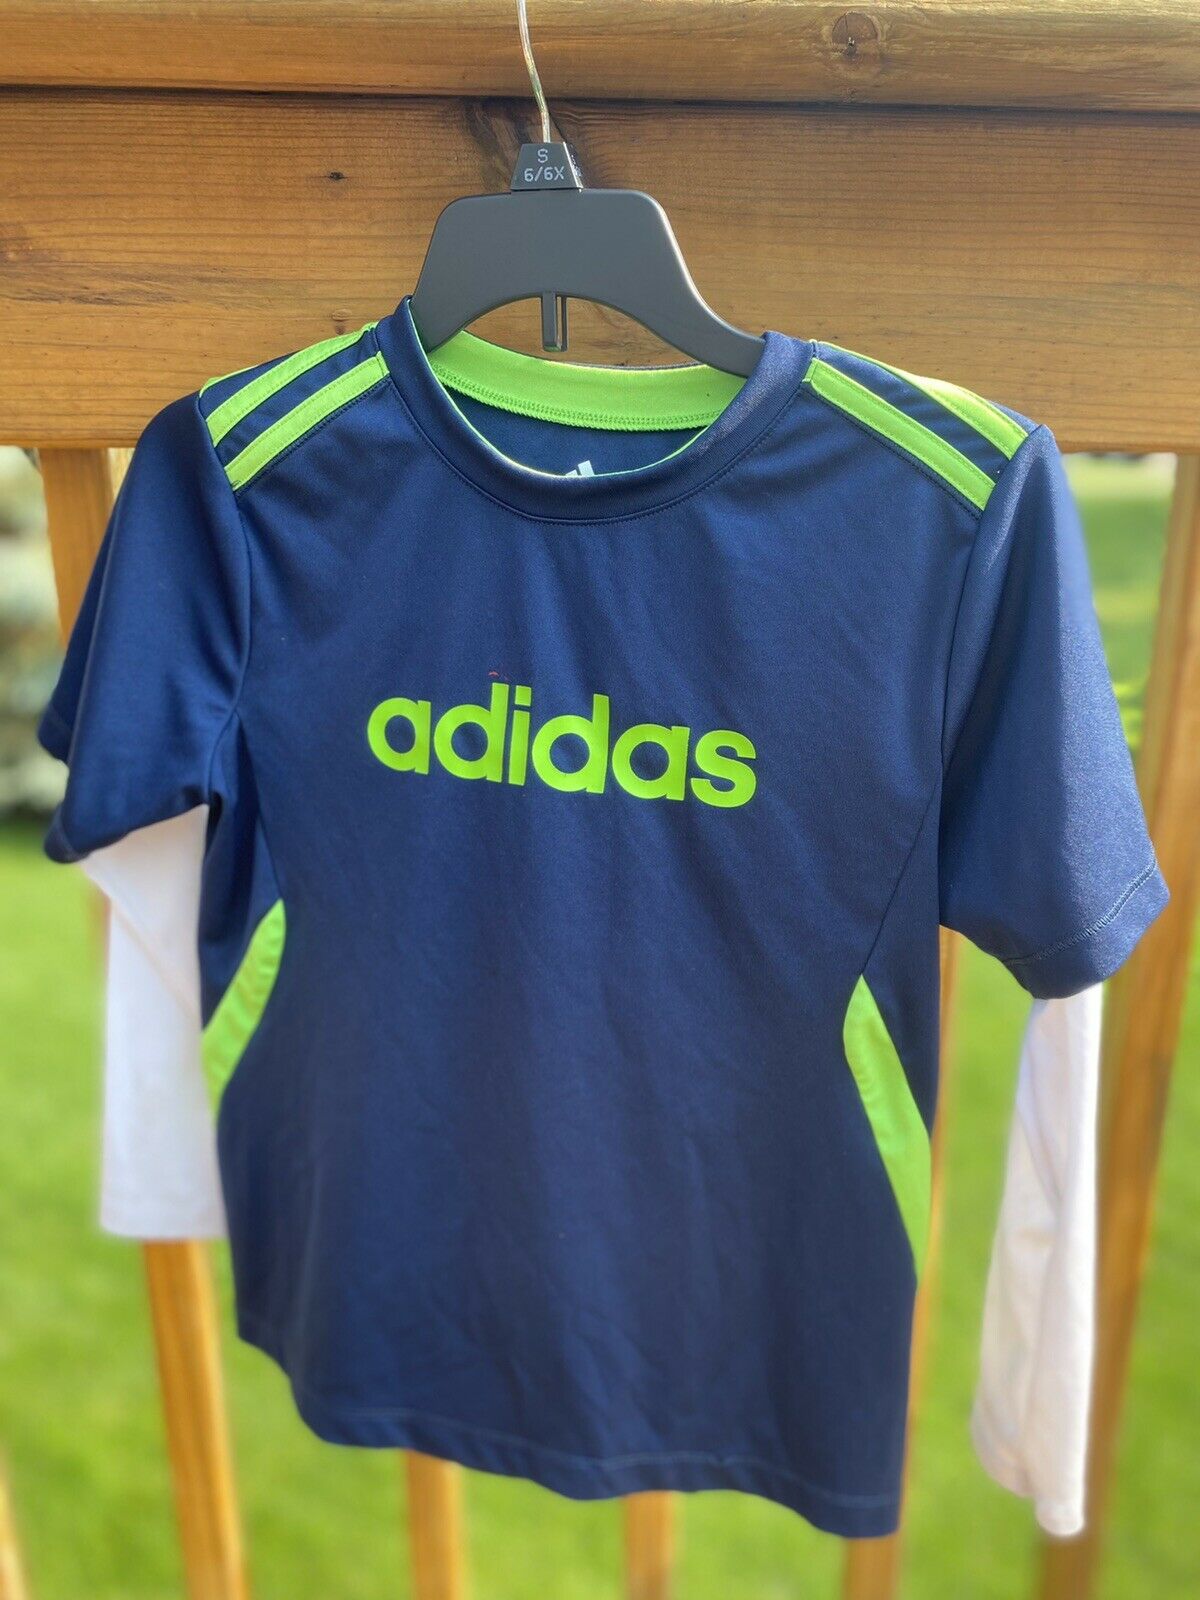 Adidas Longsleeve Youth Size 6 Soccer Jersey Navy, Green & White